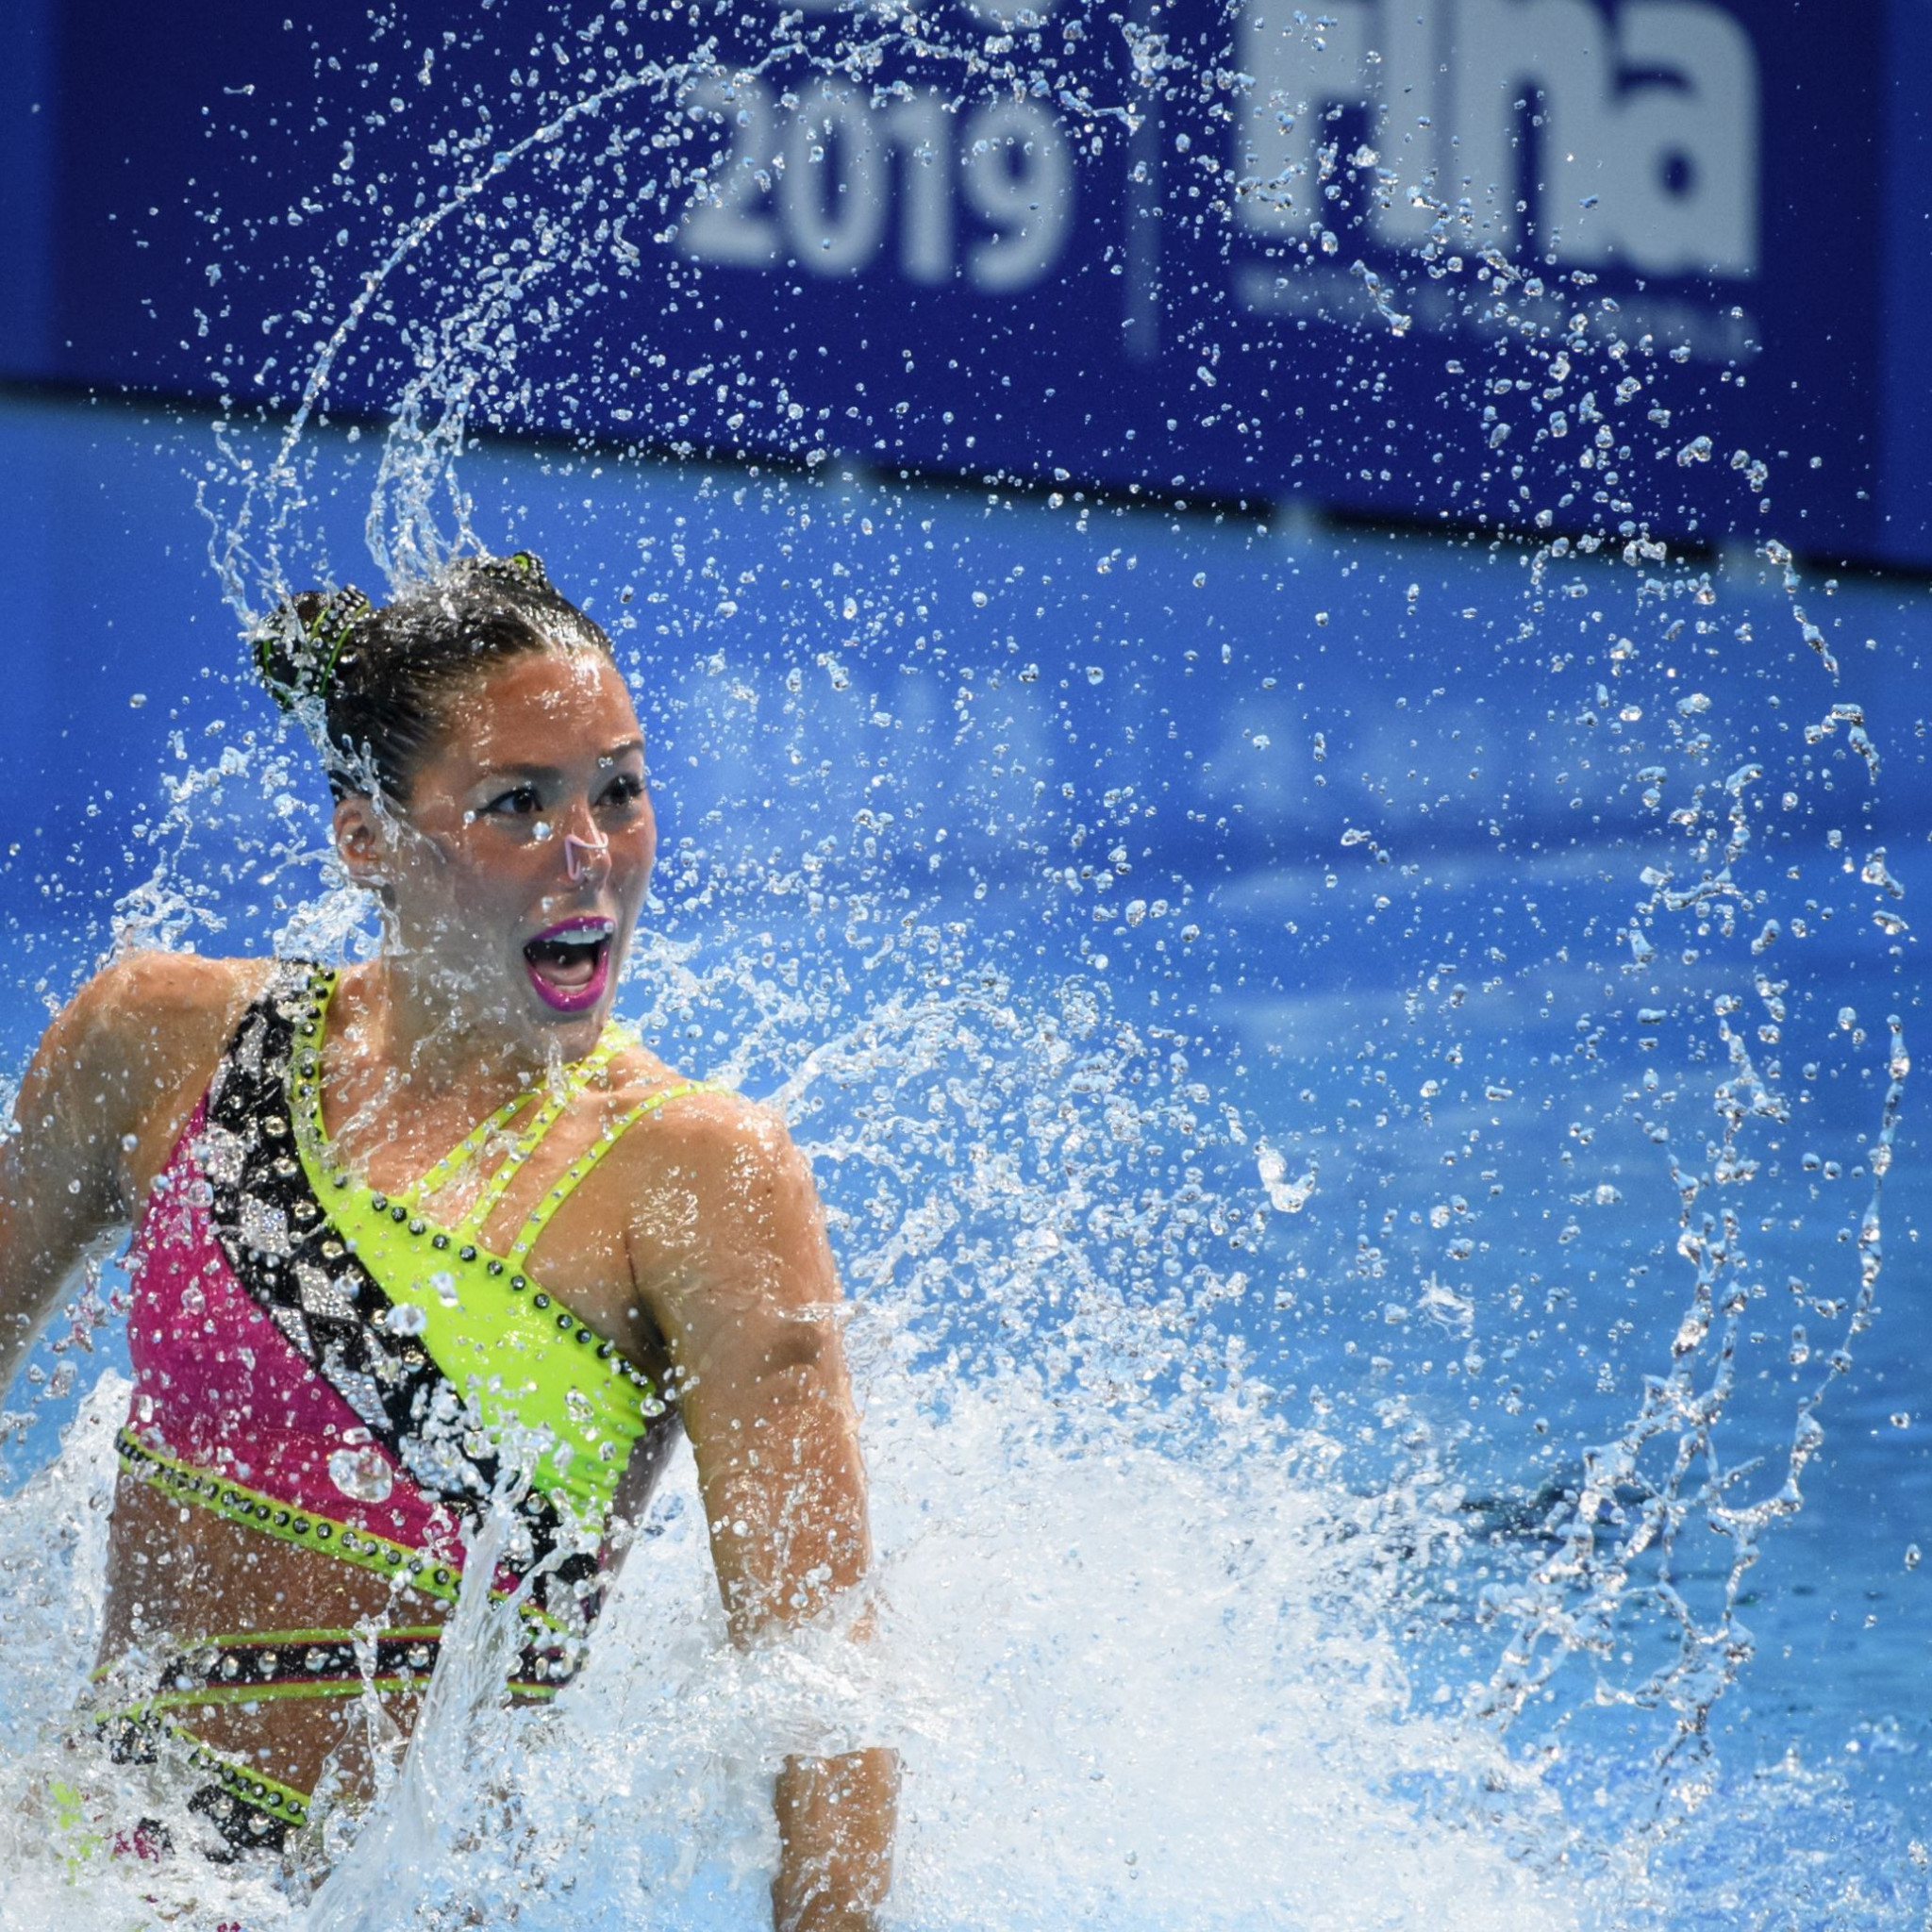 Natalia Vega was part of the US line-up that won the women's duet free at the Artistic Swimming World Series event in Berlin ©Getty Images